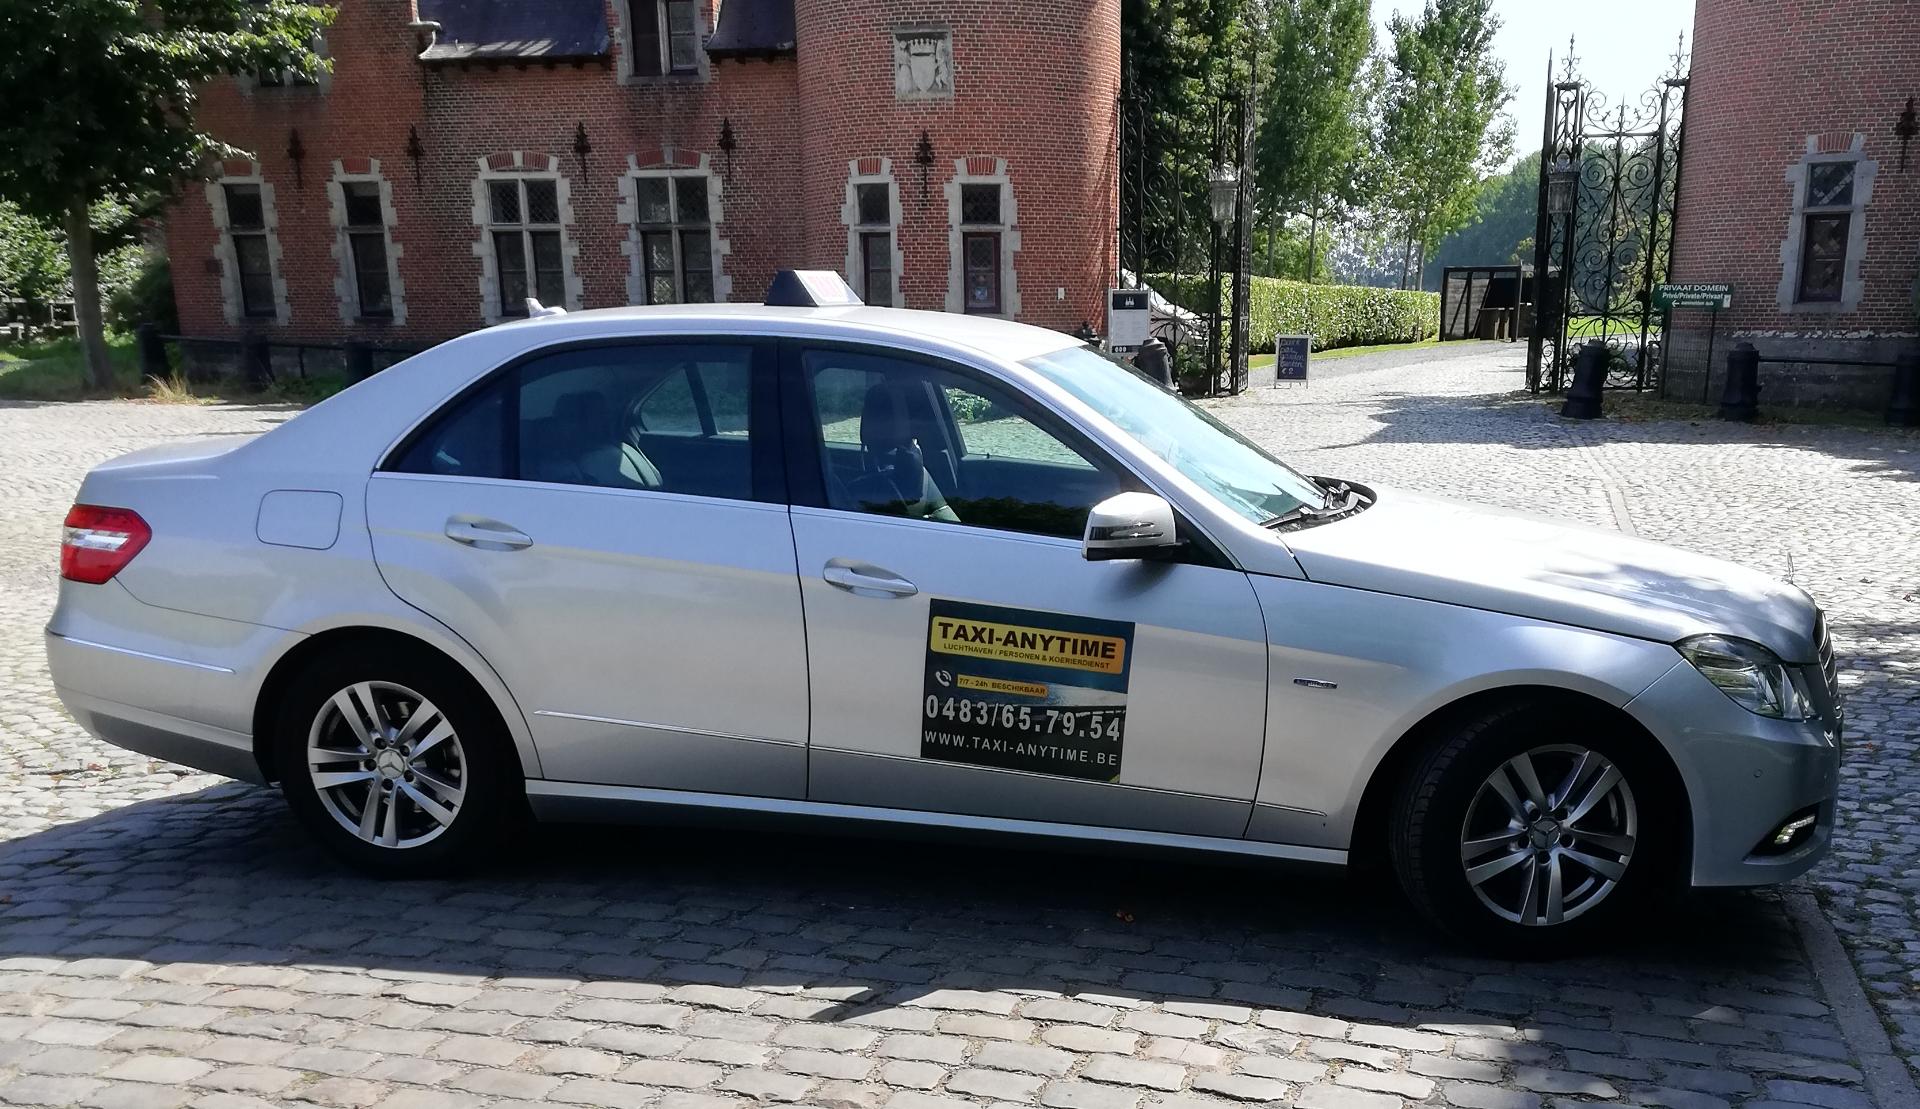 koeriers Wingene Taxi Anytime